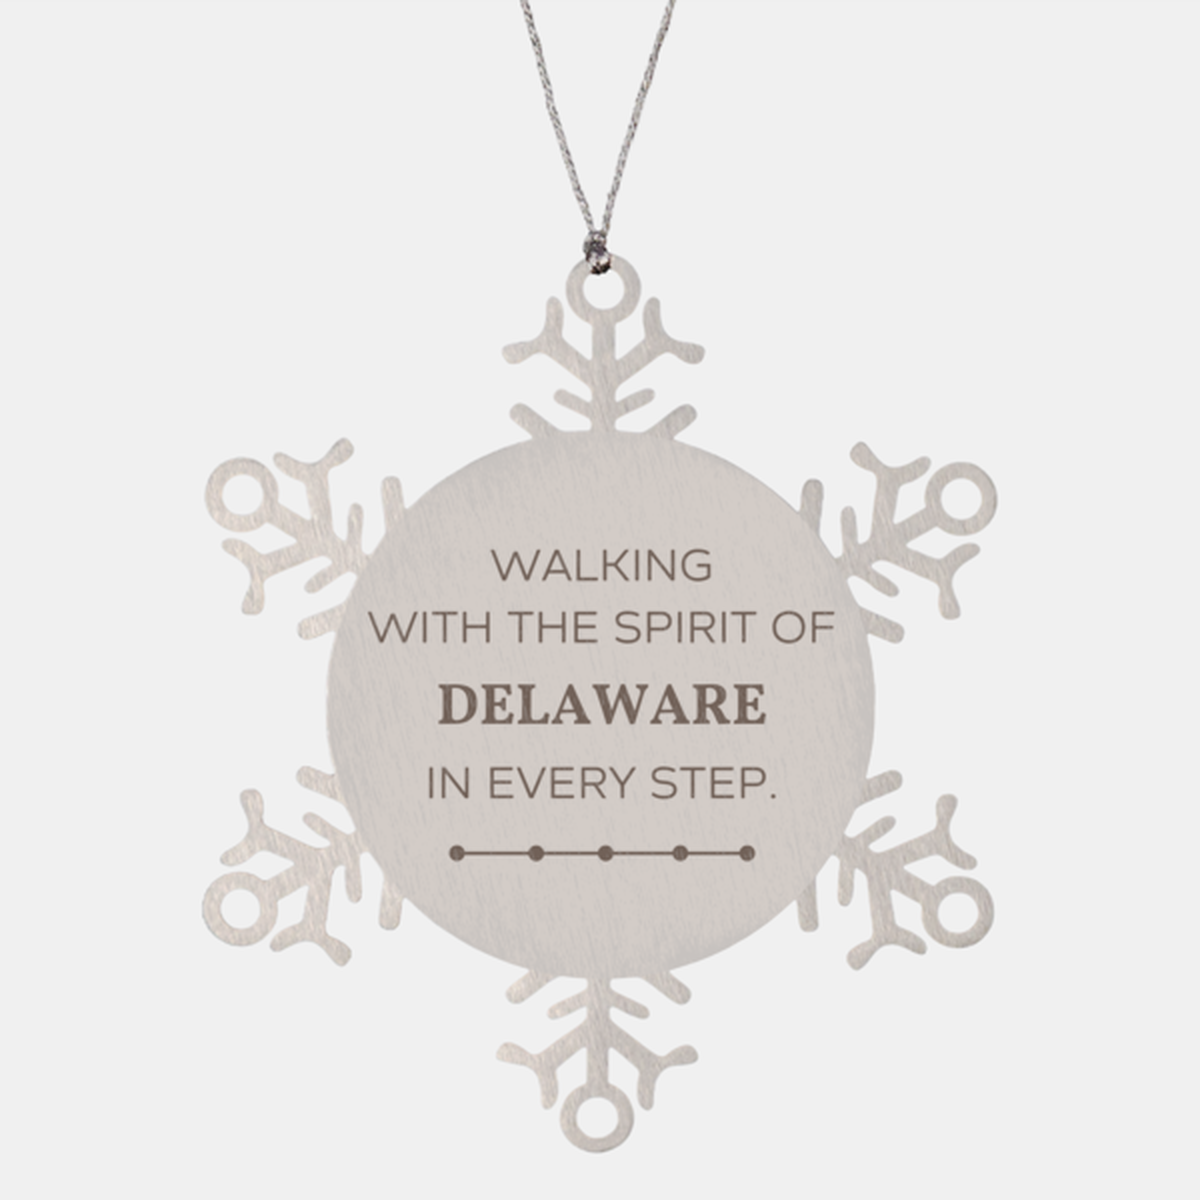 Delaware Gifts, Walking with the spirit, Love Delaware Birthday Christmas Snowflake Ornament For Delaware People, Men, Women, Friends